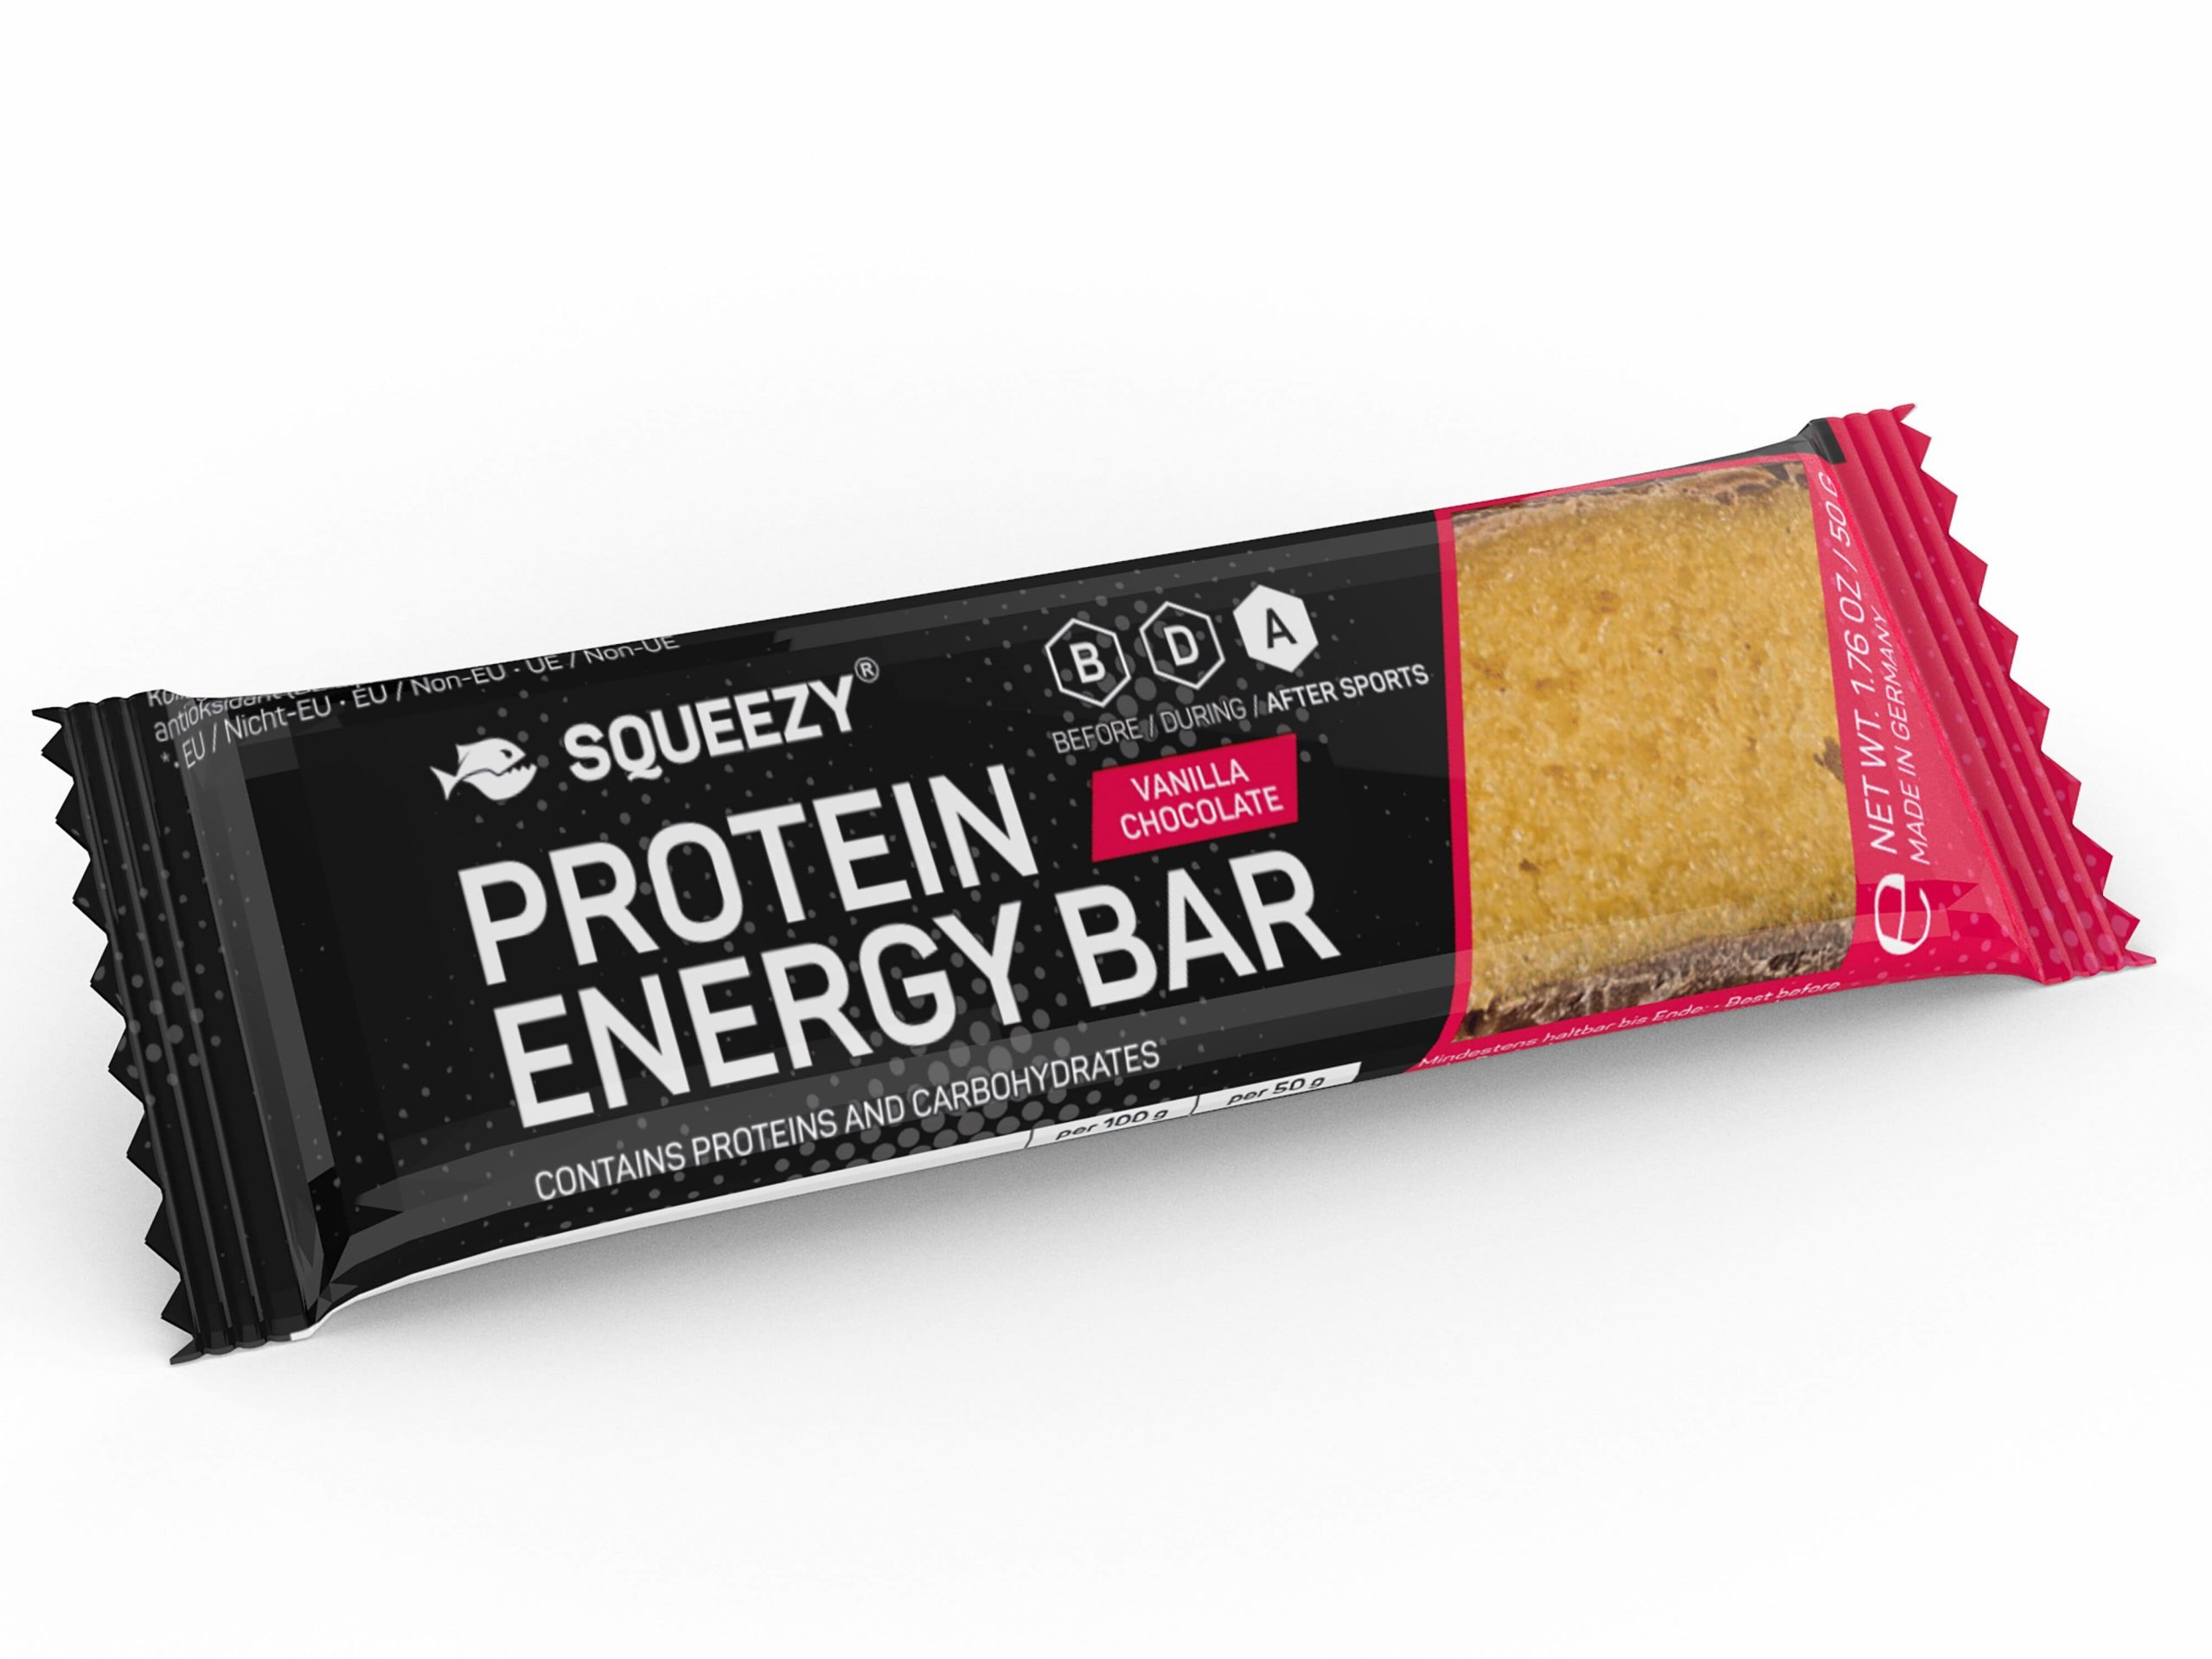 PRORIDER - NUTRITION SQUEEZY - Protein Energy Bar for regeneration.